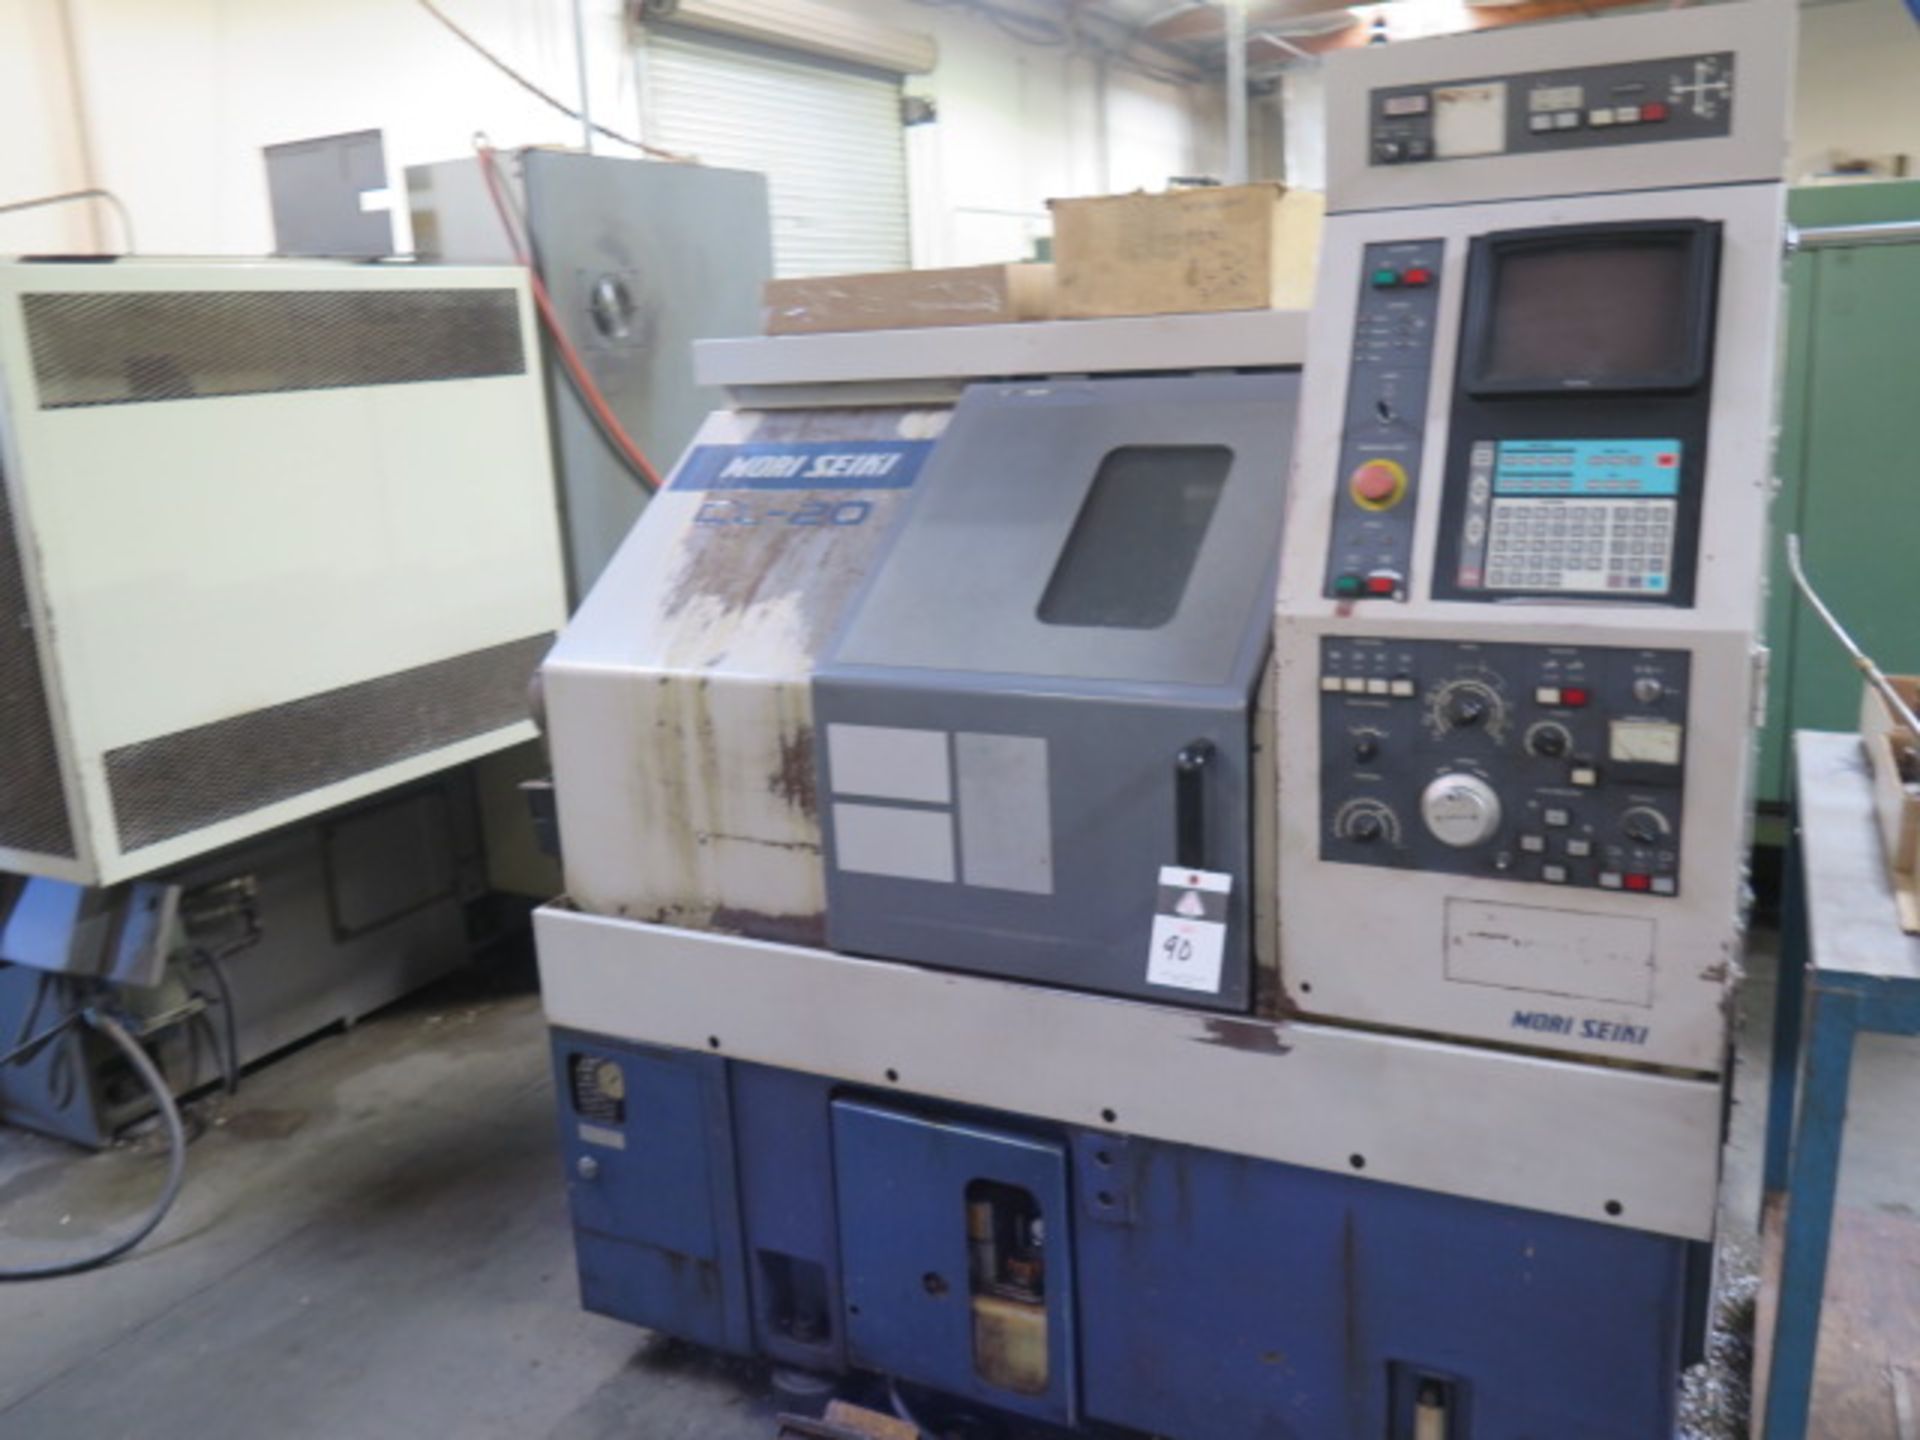 Mori Seiki CL-20A CNC Lathe s/n 544 w/ Yasnac Controls, Tool Presetter, 10-Station, SOLD AS IS - Image 2 of 10